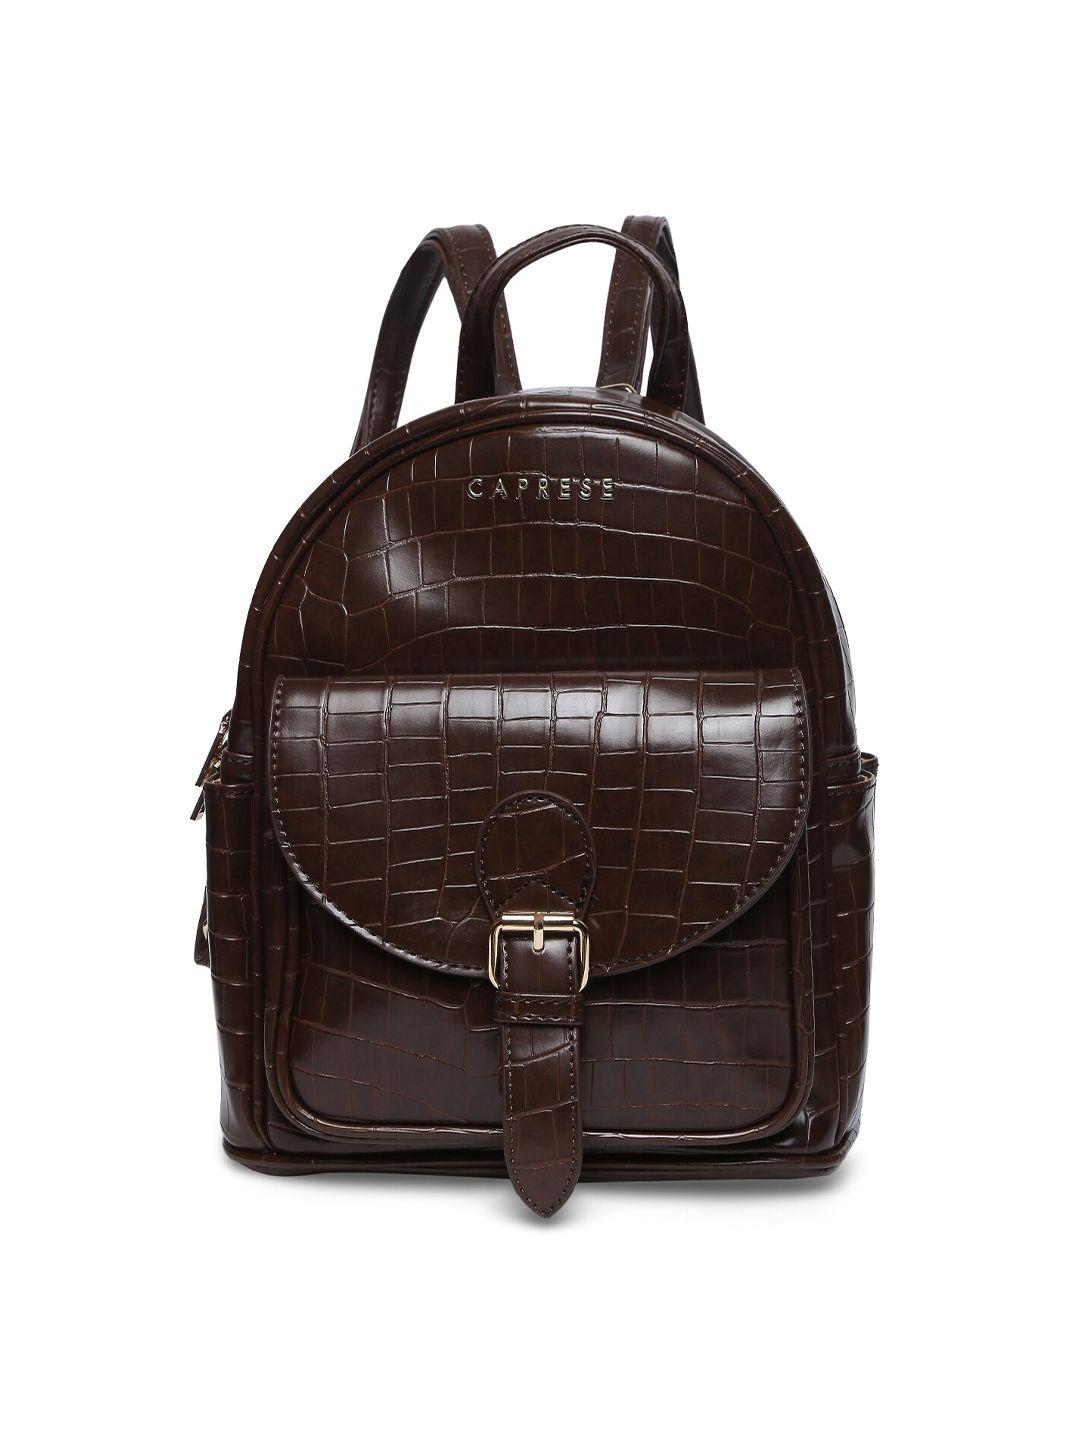 caprese women textured leather small backpack